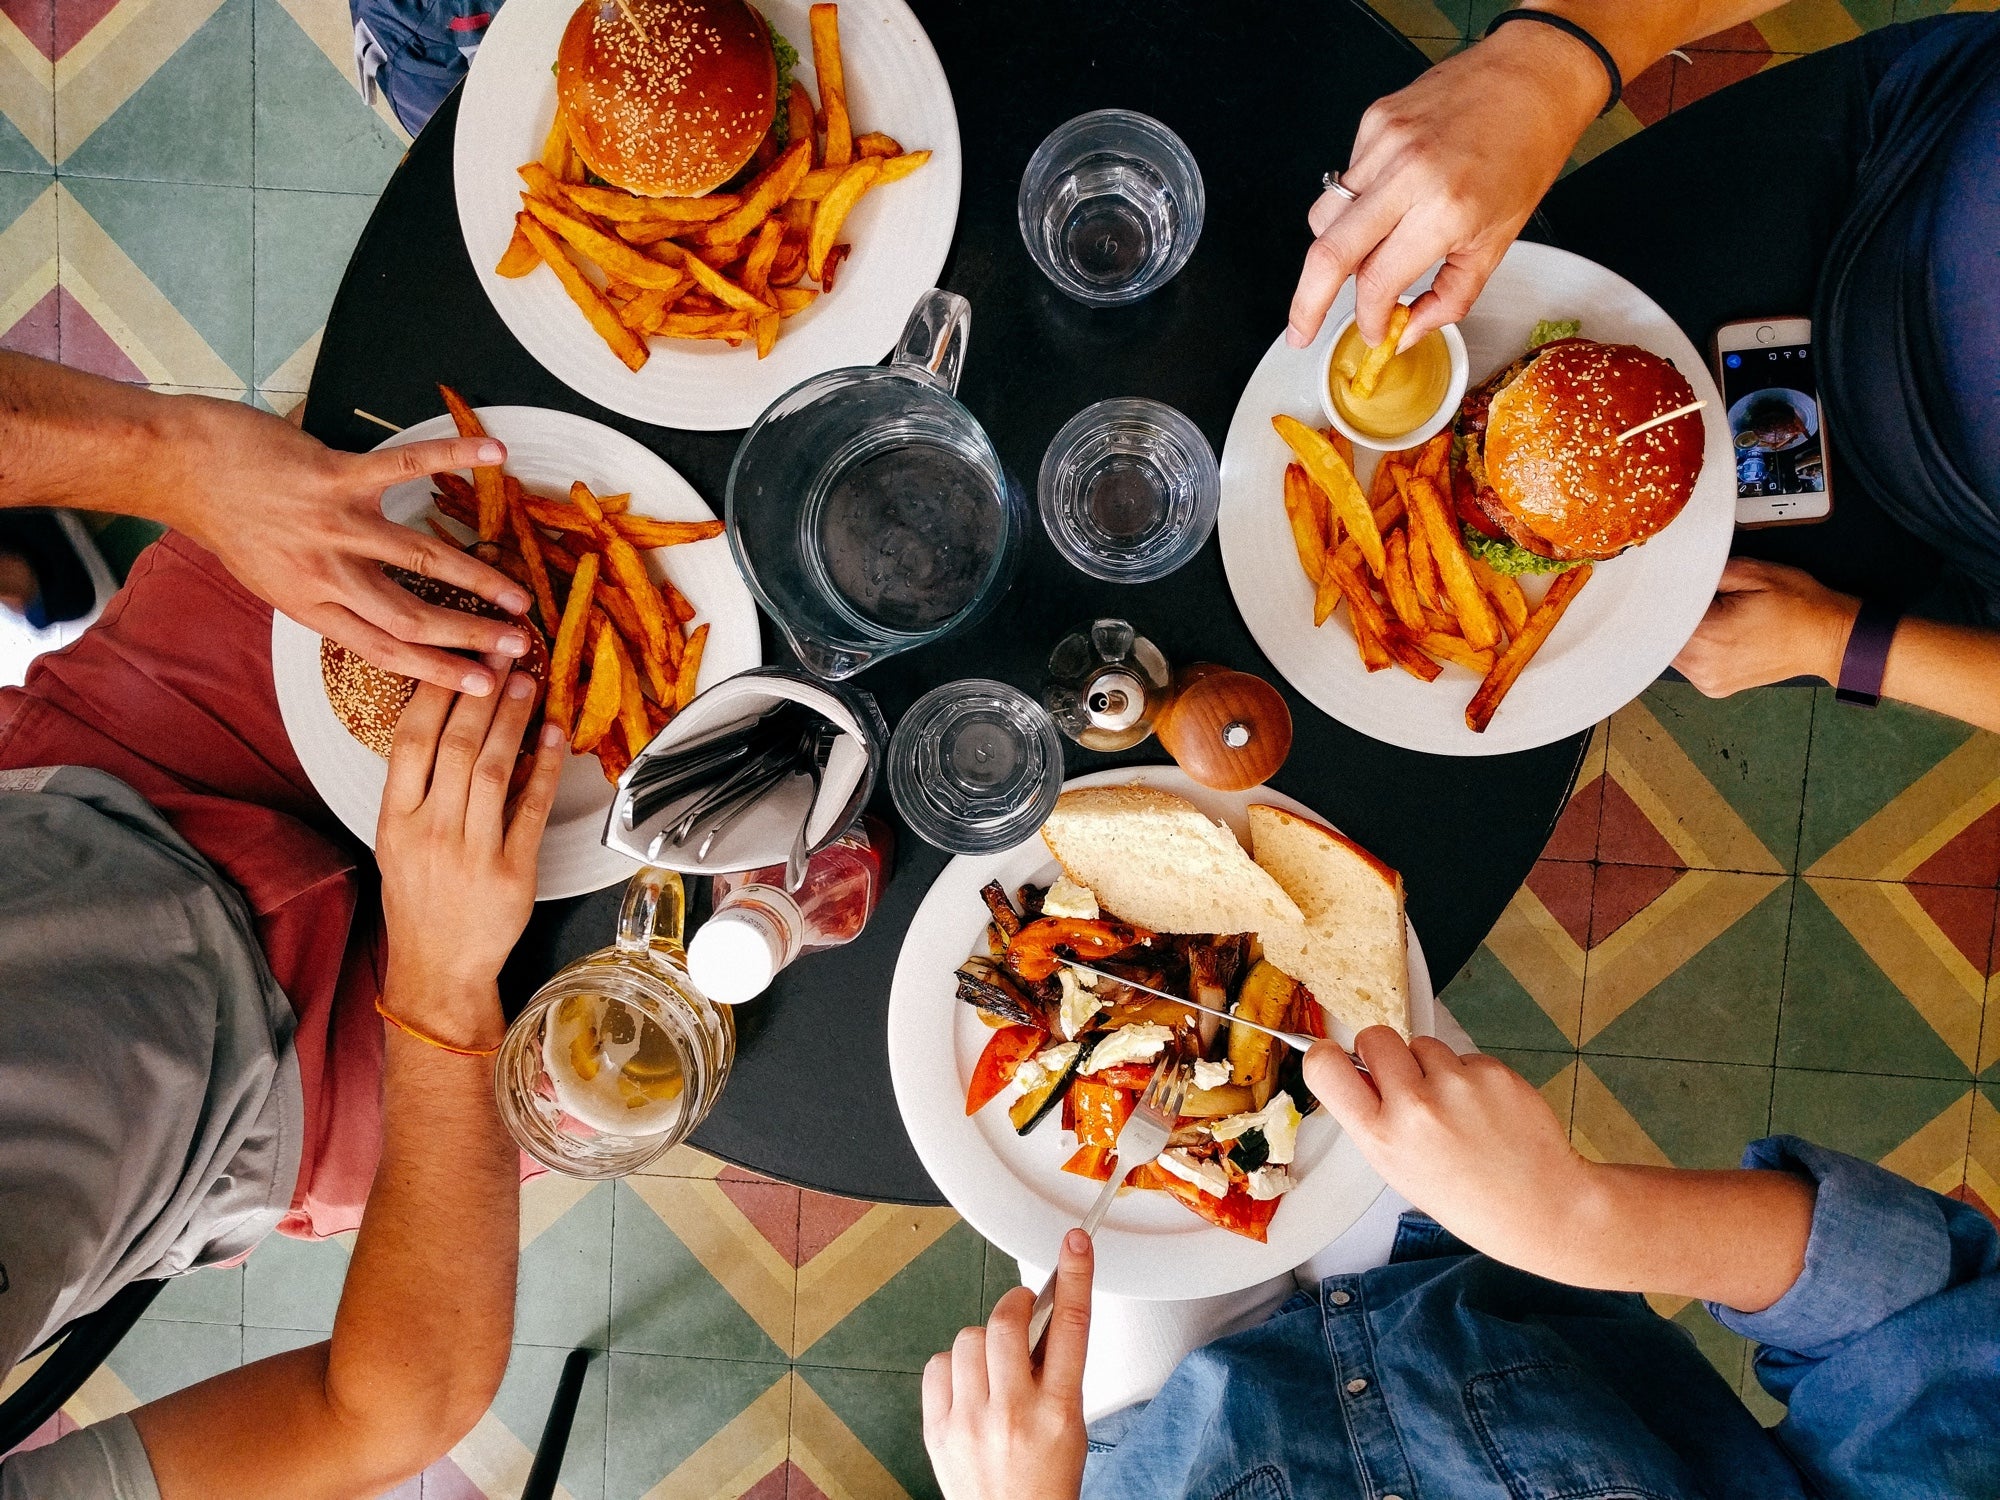 A table shot from above shows four people eating pub food